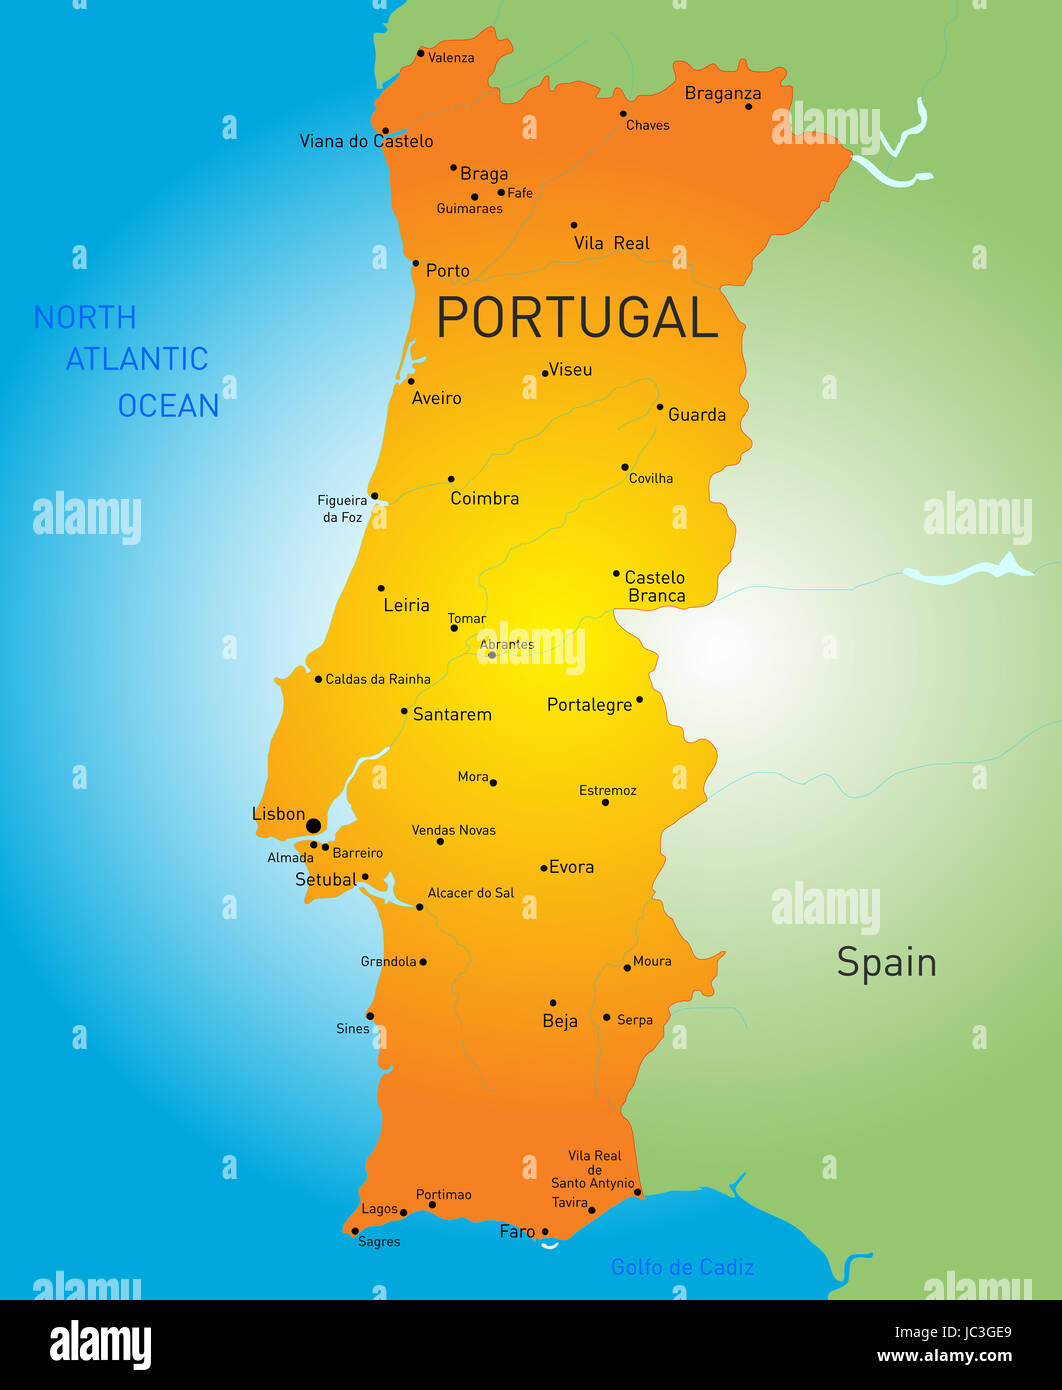 Portugal Physical Map Retro Colors Stock Vector by ©Cartarium